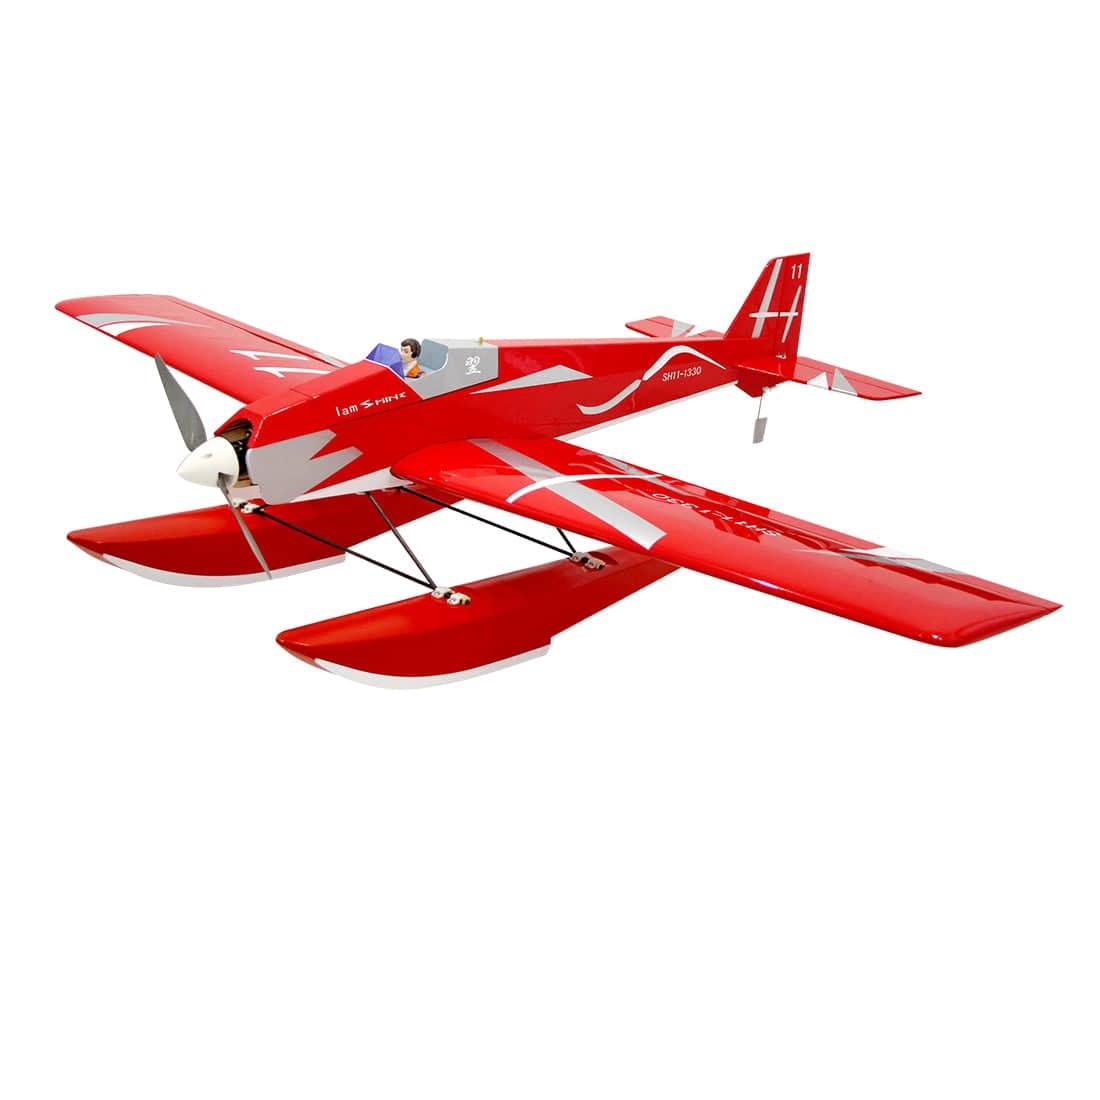 Rc Float Planes For Sale: Choosing the right material for an RC float plane. 